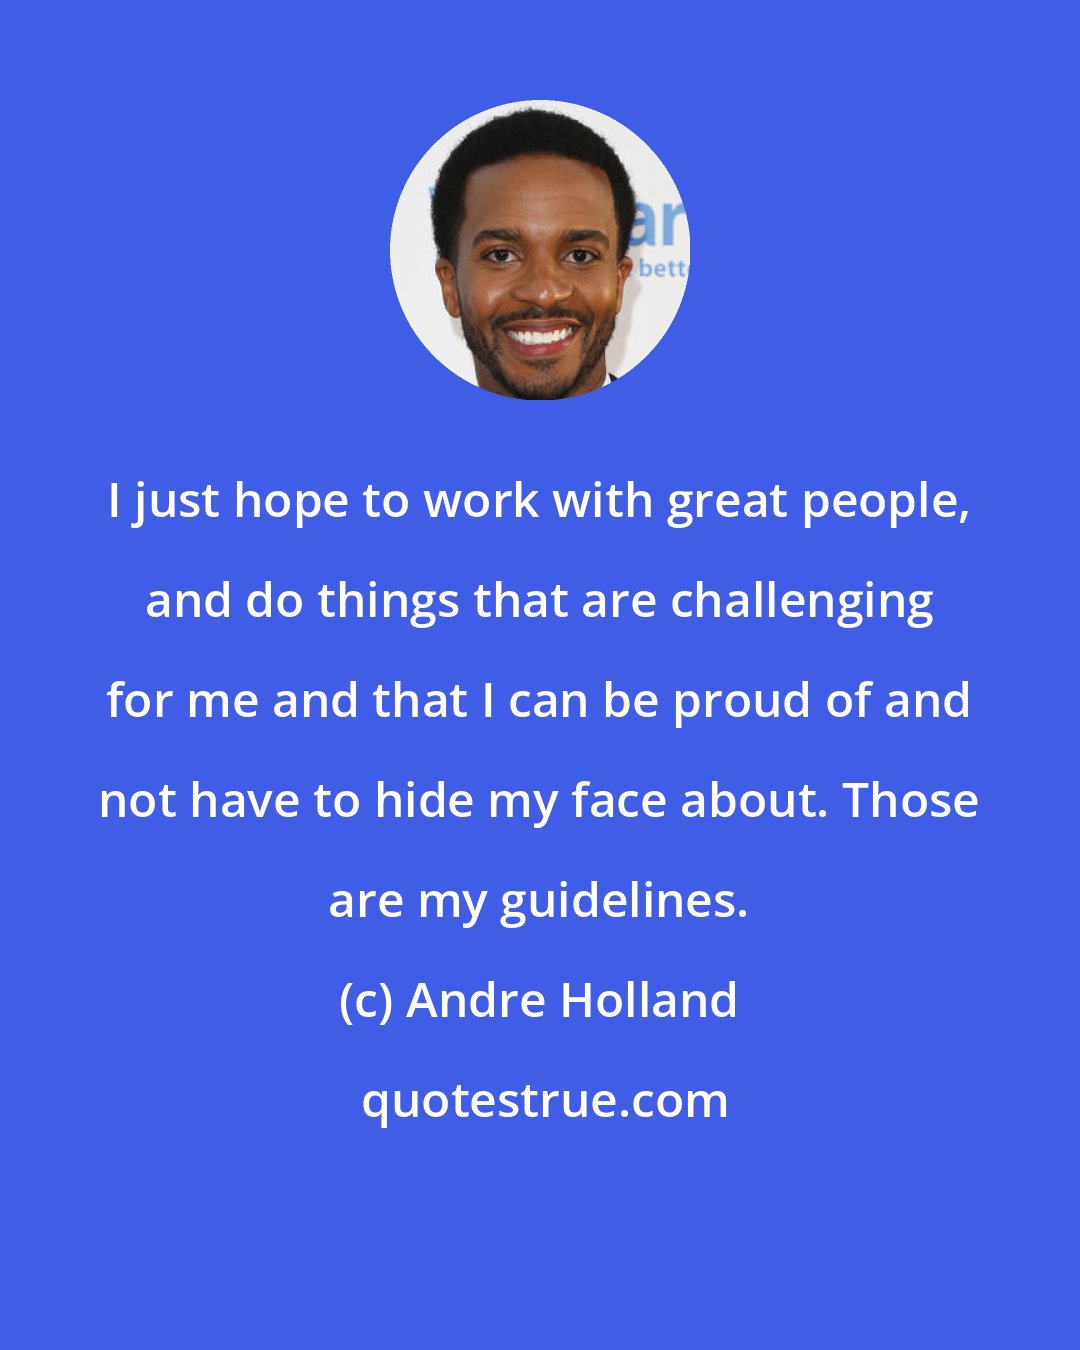 Andre Holland: I just hope to work with great people, and do things that are challenging for me and that I can be proud of and not have to hide my face about. Those are my guidelines.